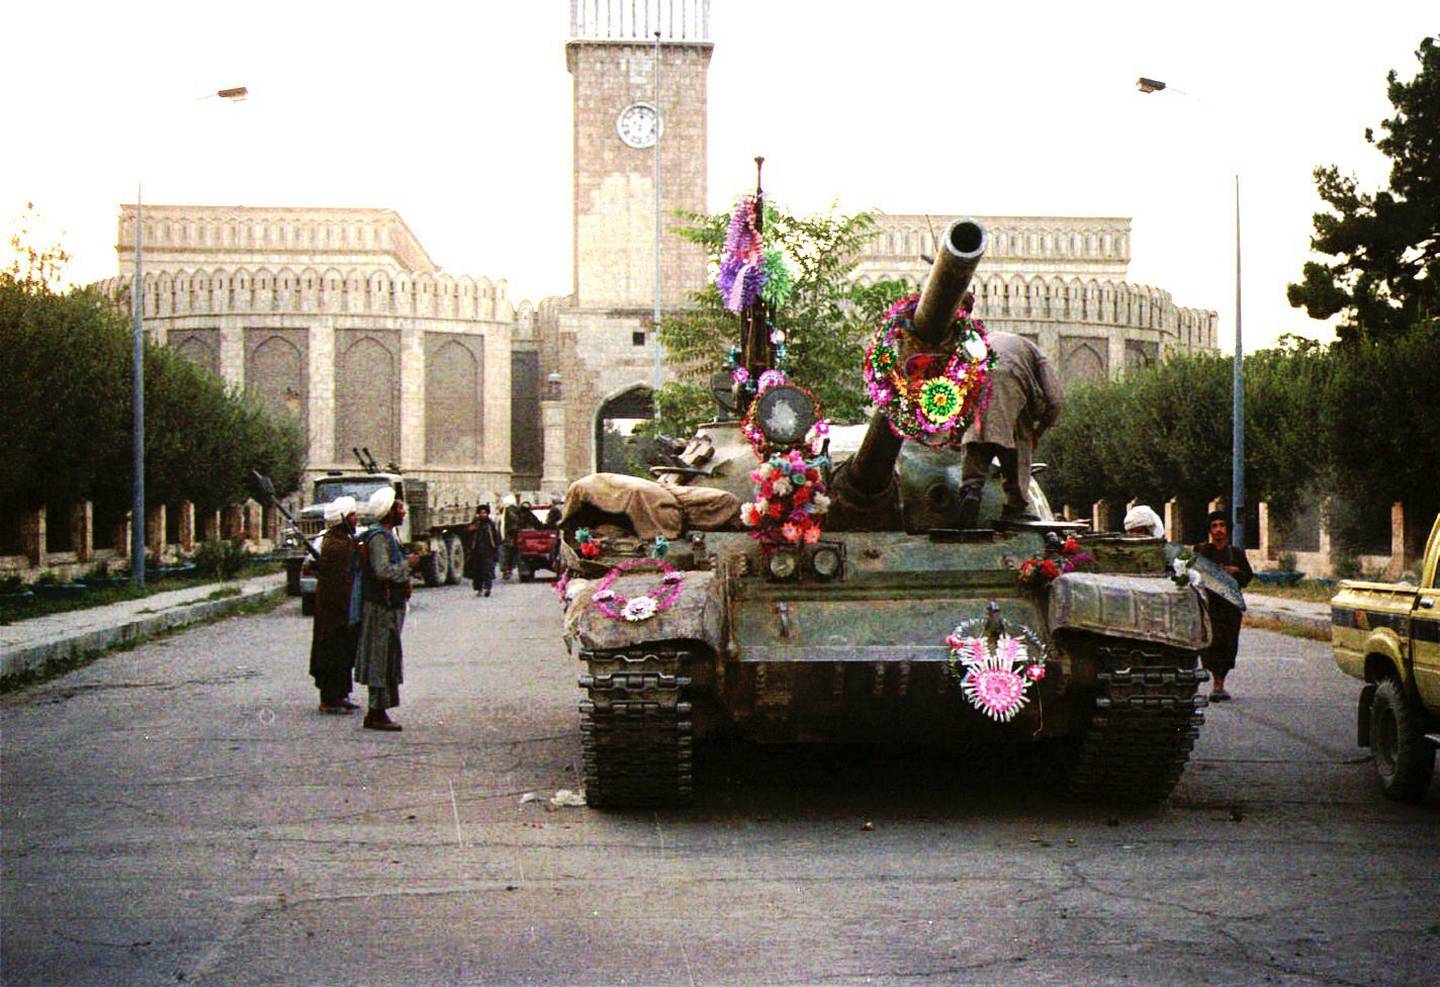 Tanks manned by Taliban fighters parade in front of the the damaged Presidential Palace in Kabul, Afghanistan, in 1996. AP